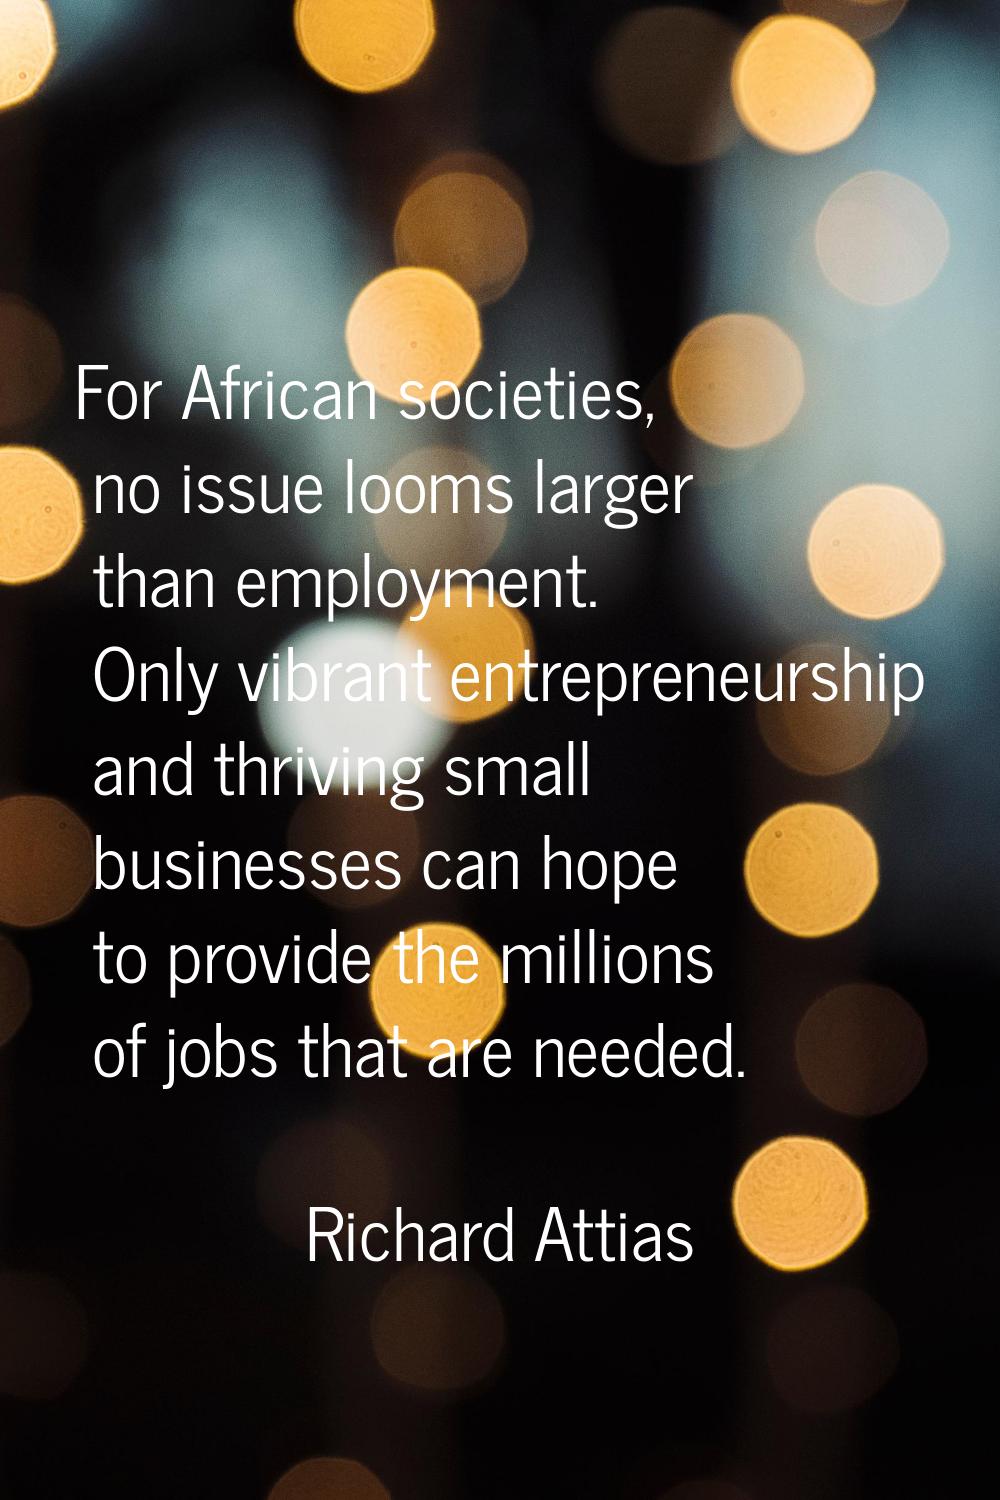 For African societies, no issue looms larger than employment. Only vibrant entrepreneurship and thr